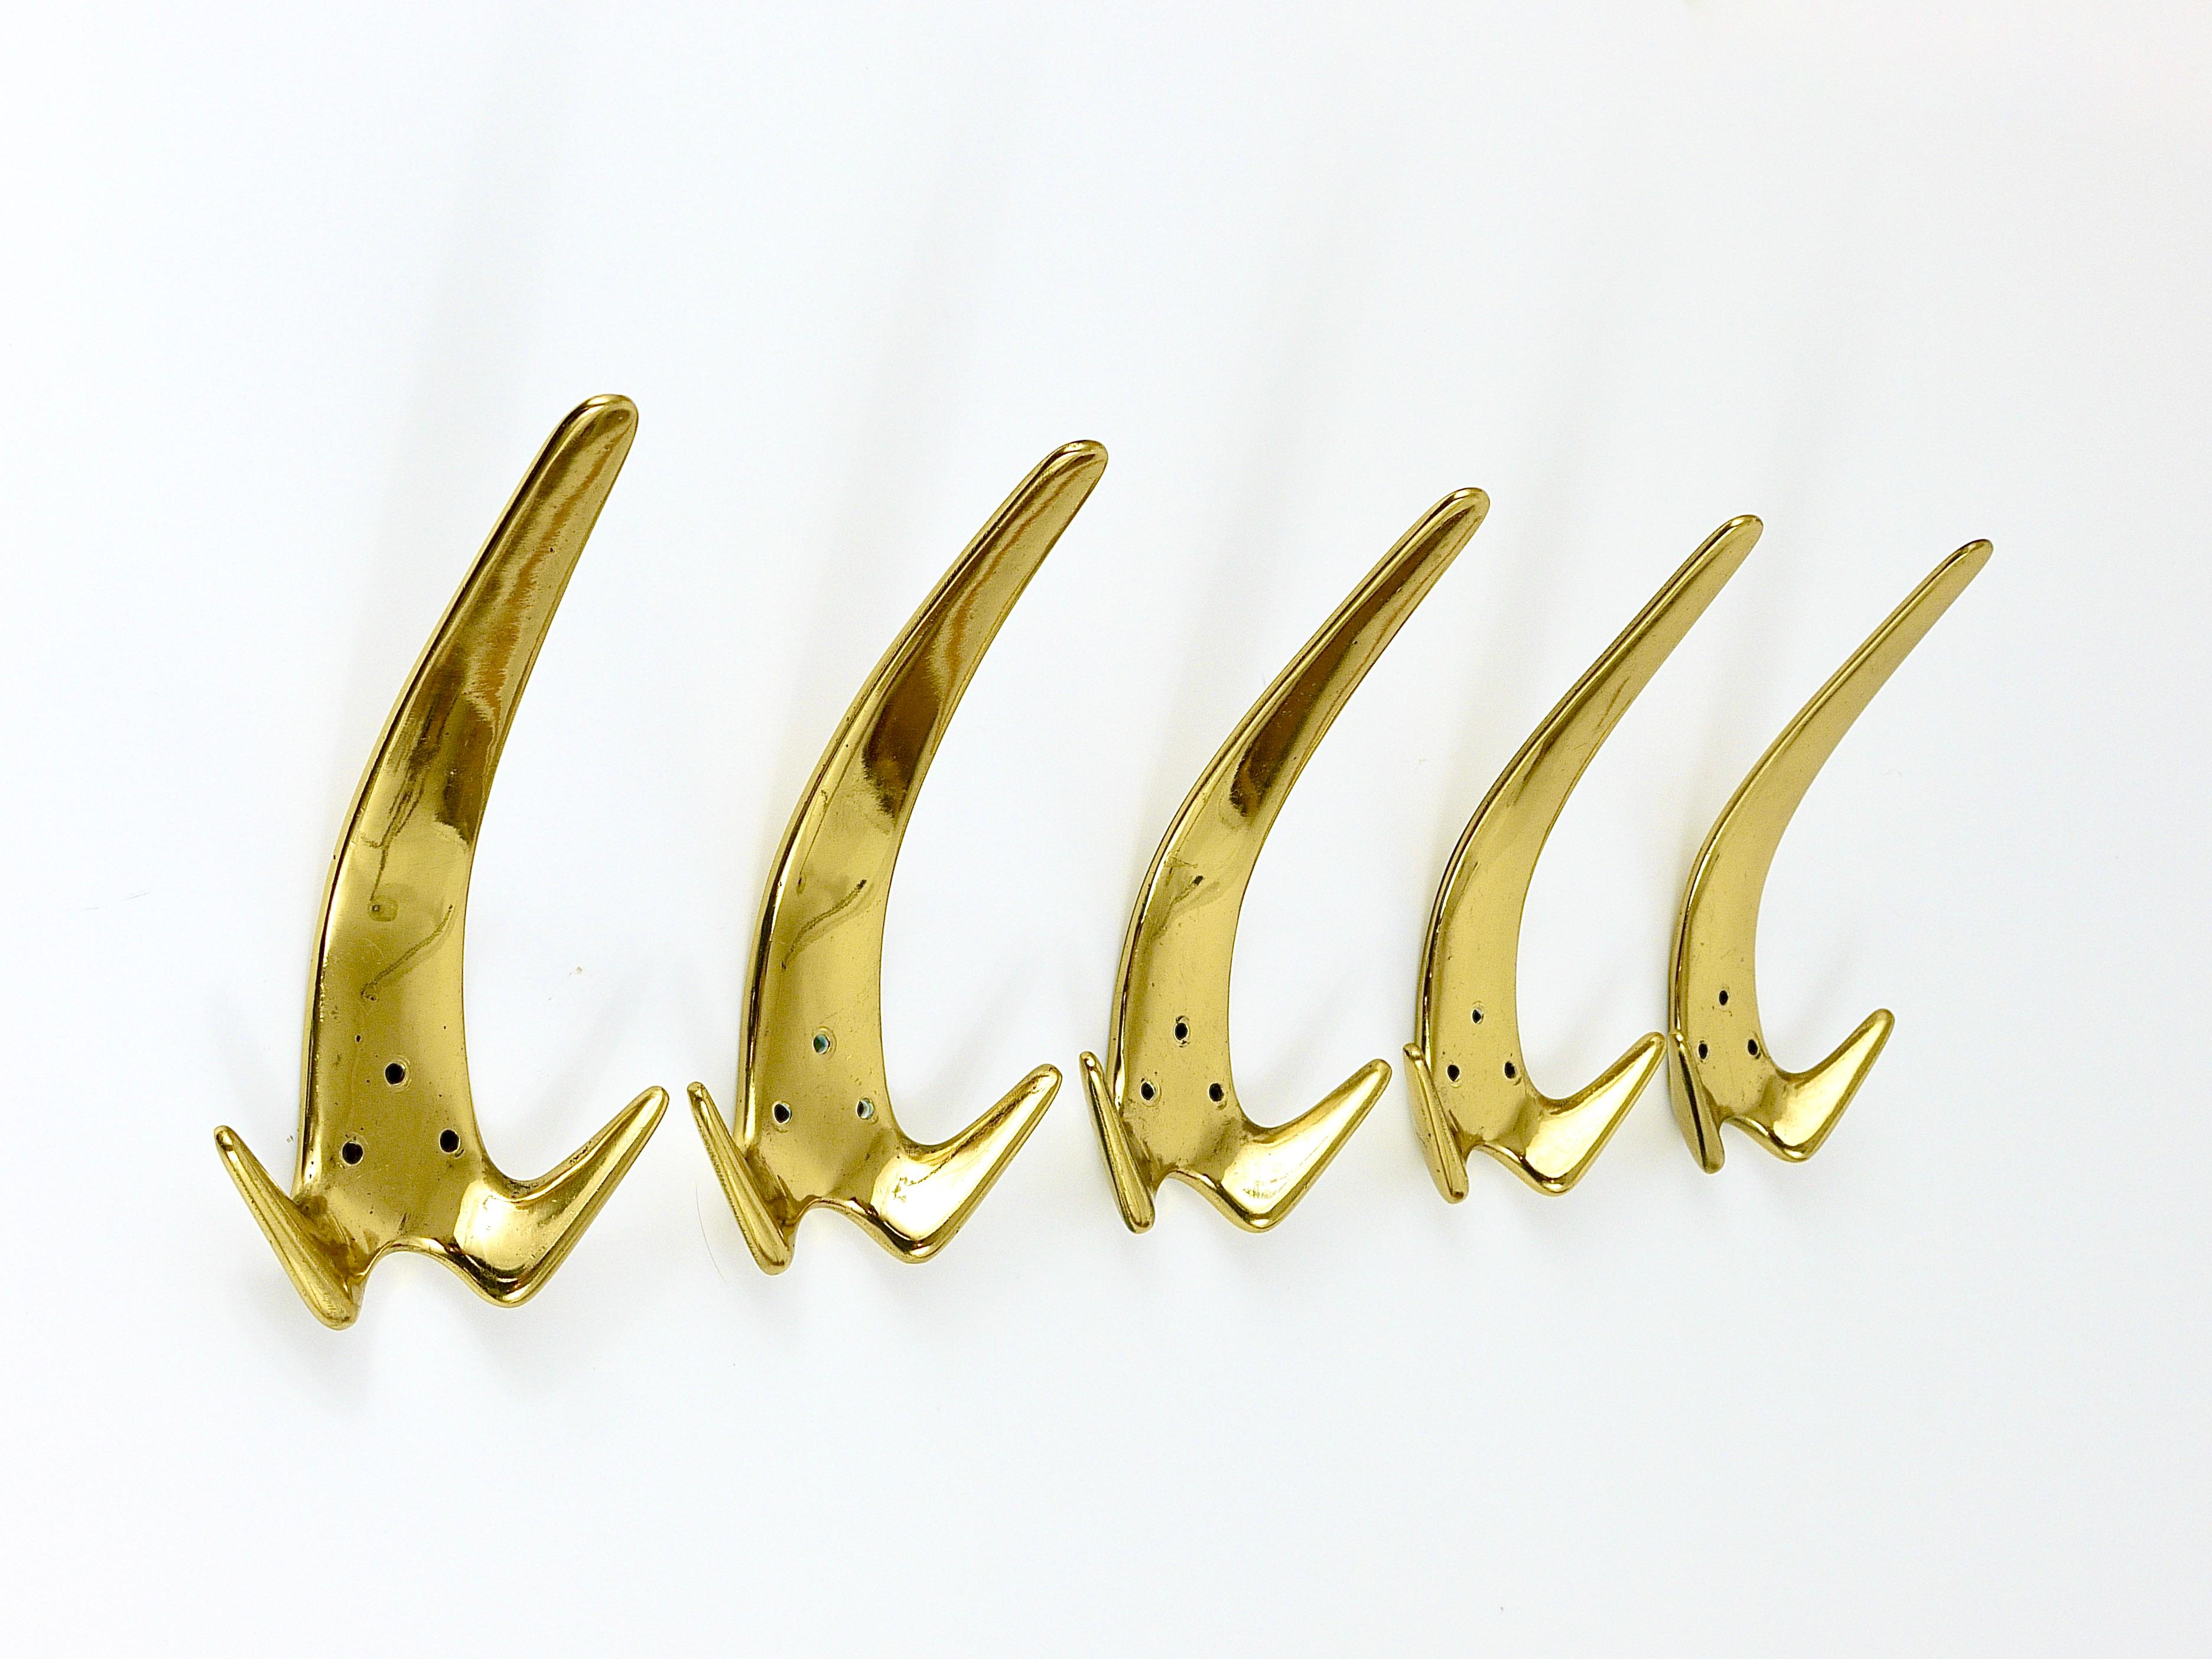 Up to Five Carl Aubock Large Brass Double Wall Coat Hooks #4056, Austria, 1950s For Sale 4